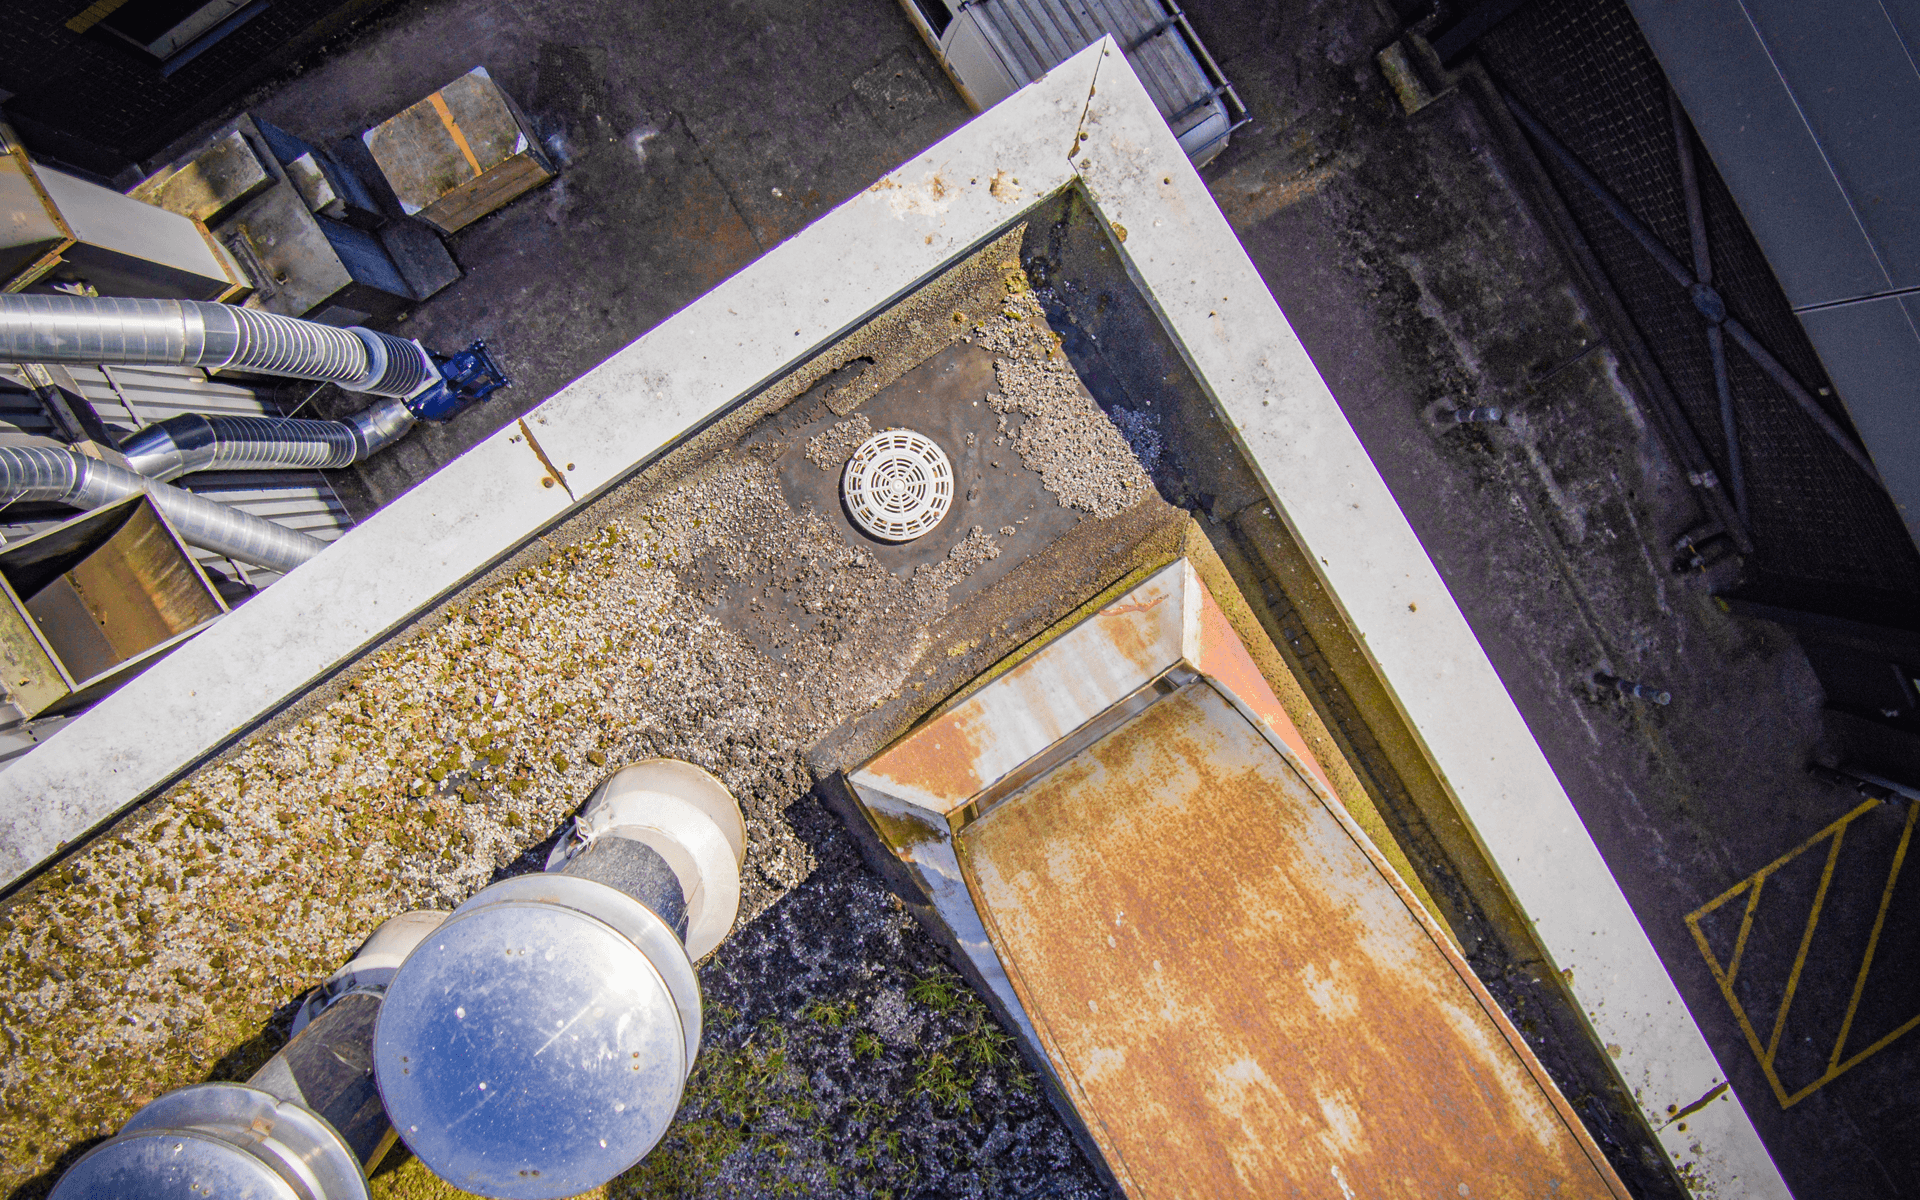 "DJI Inspire 1" aerial drone photo for a roof survey in Midsomer Norton showing a drain and chimneys